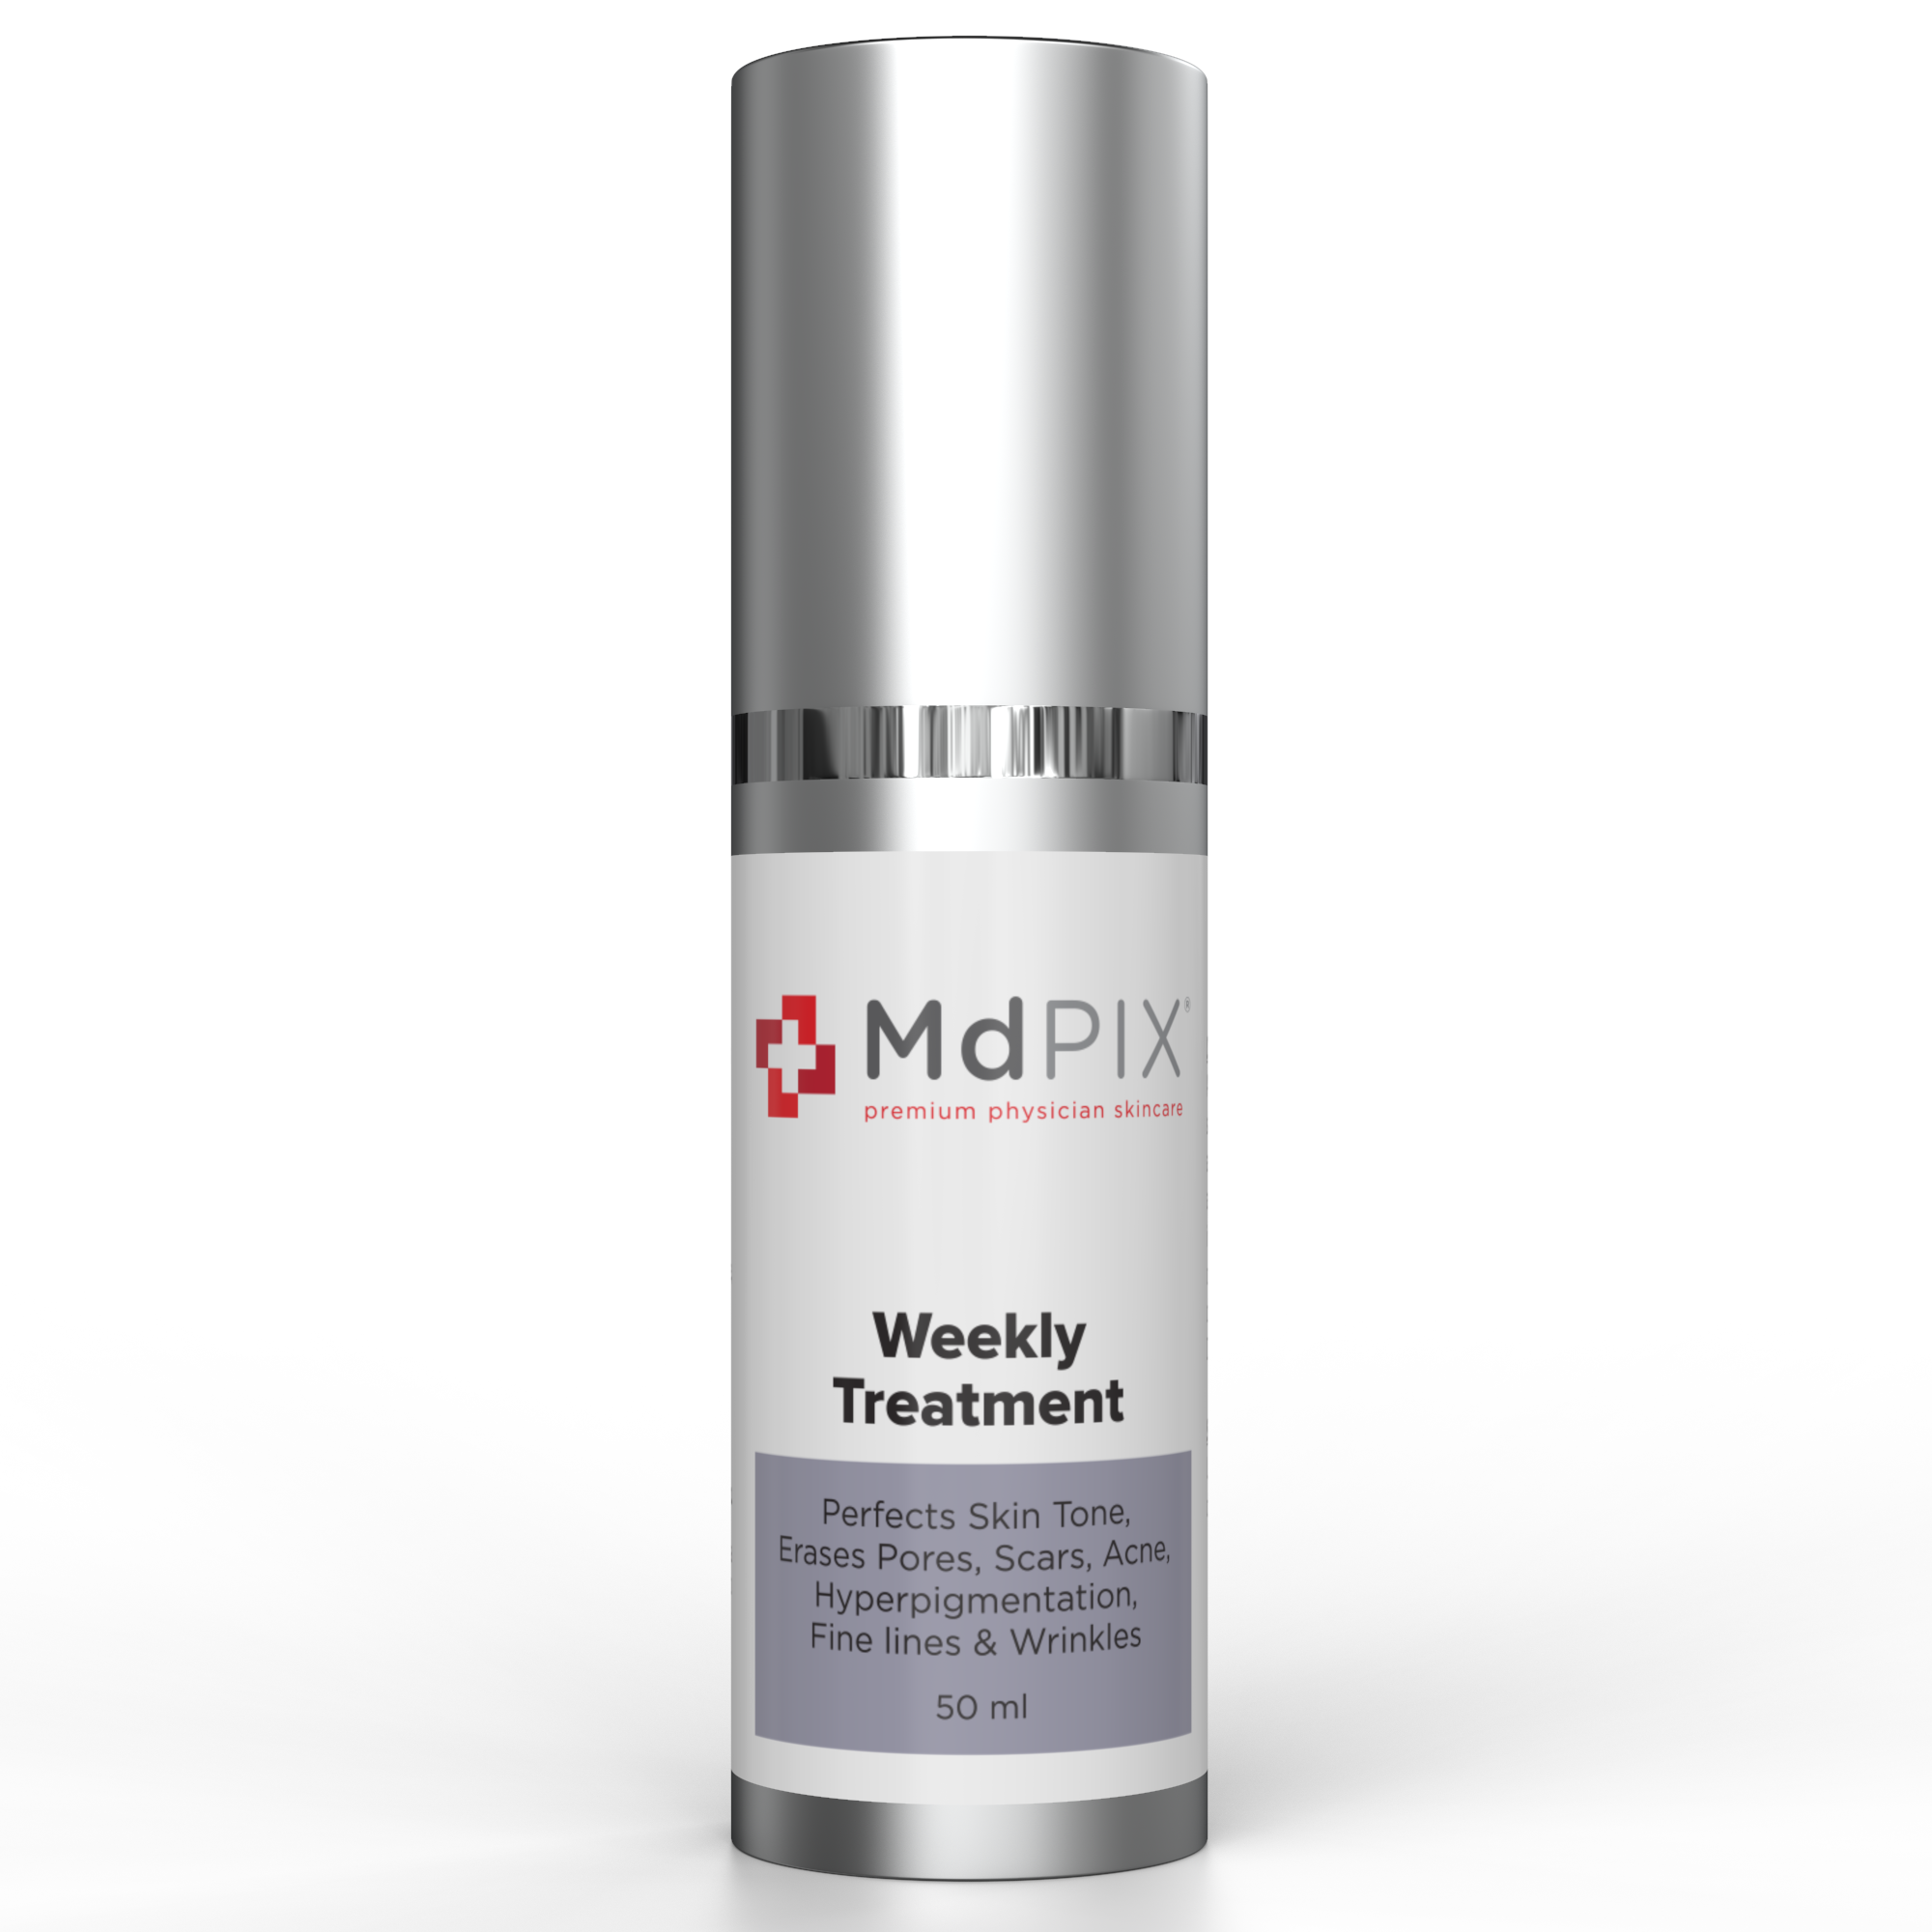 MD PIX Weekly Treatment